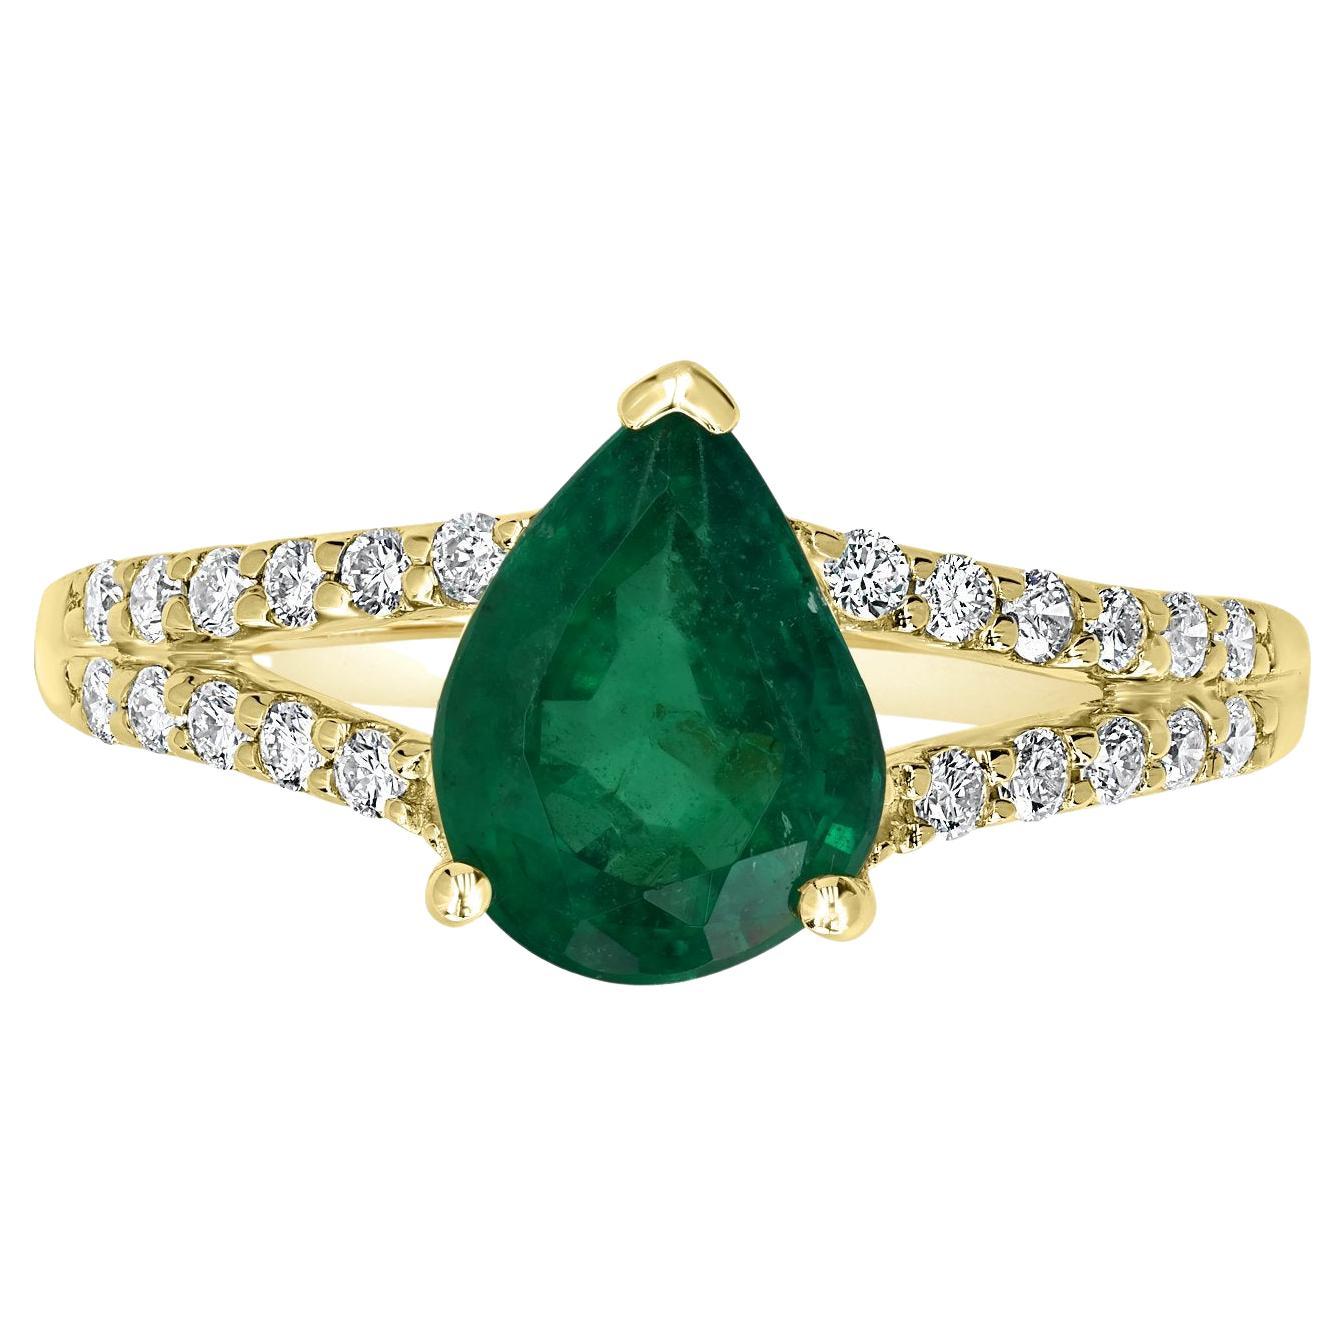 1.43ct Emerald Ring with 0.22Tct Diamonds Set in 18K Yellow Gold For Sale